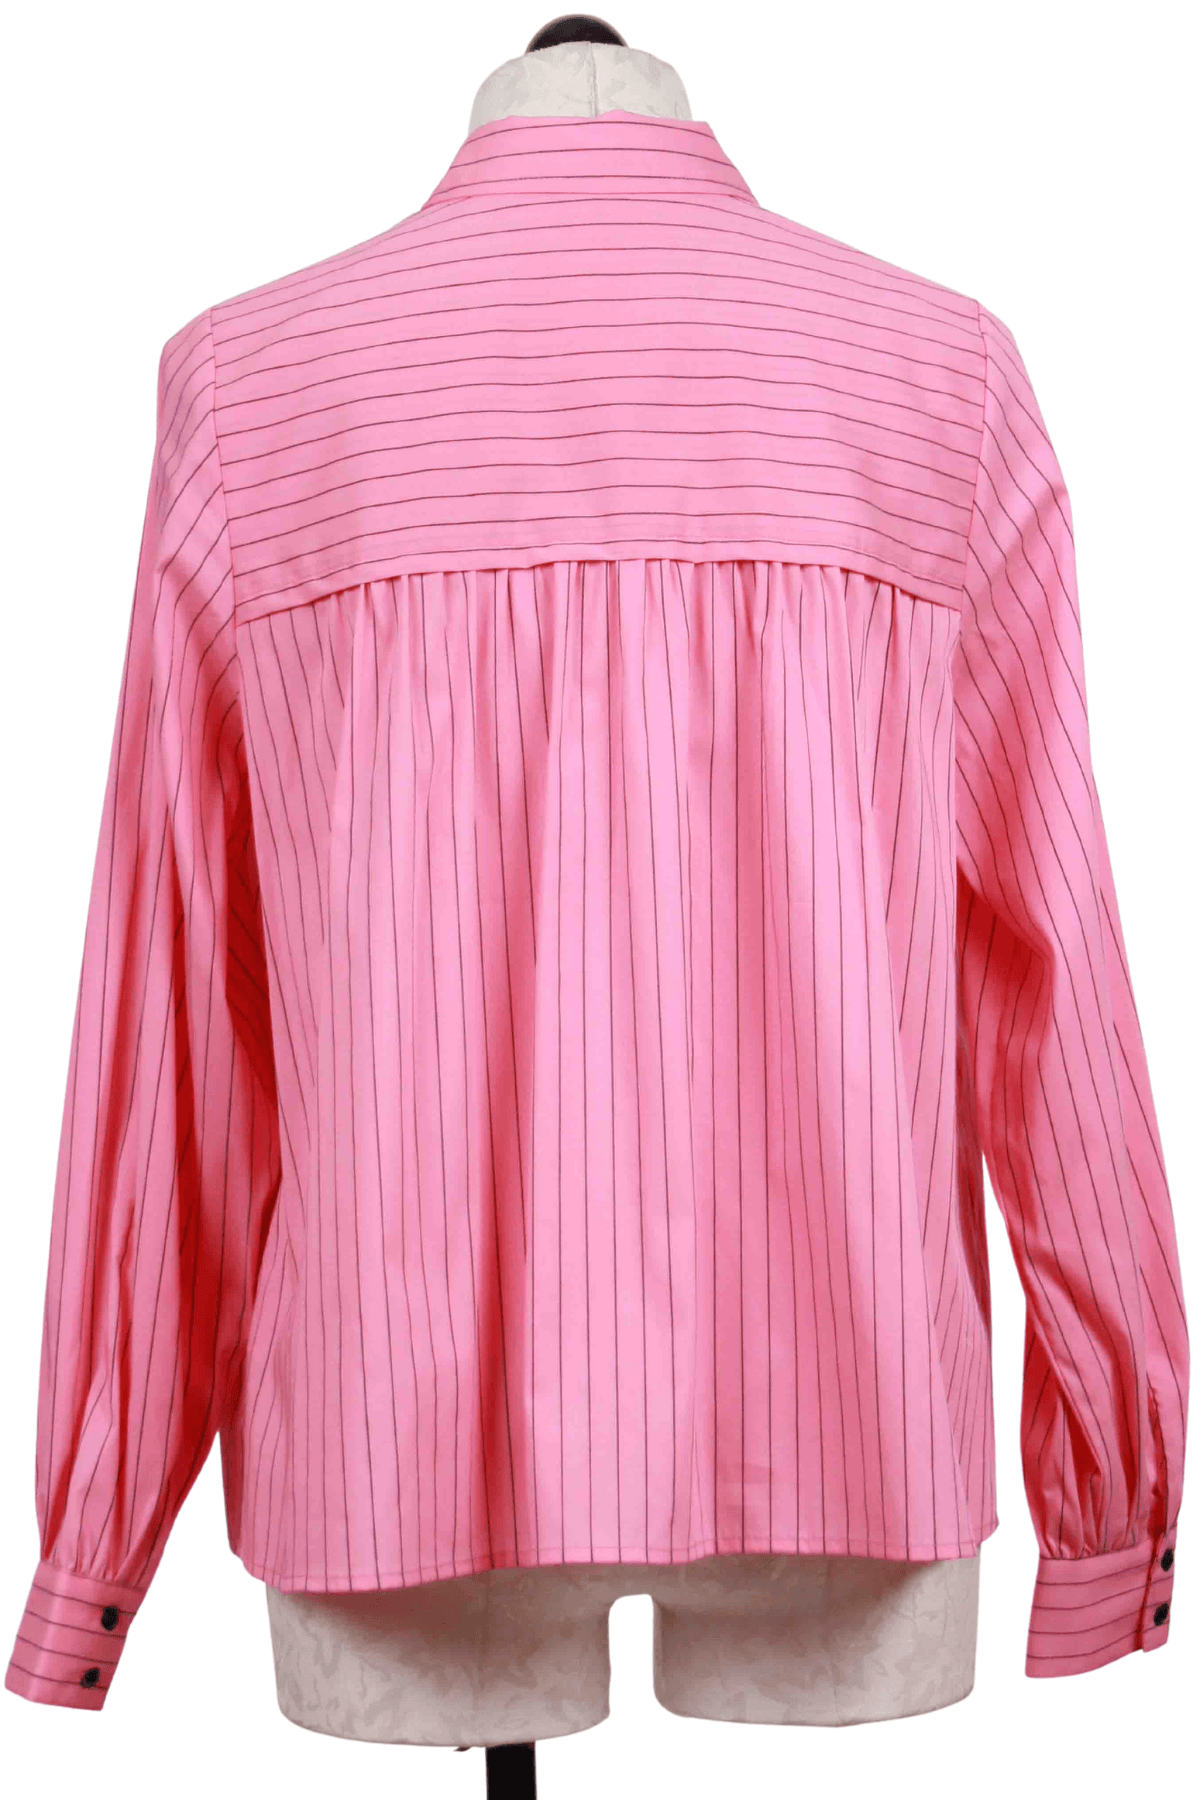 back view of Woven Terna Striped Blouse by Part Two